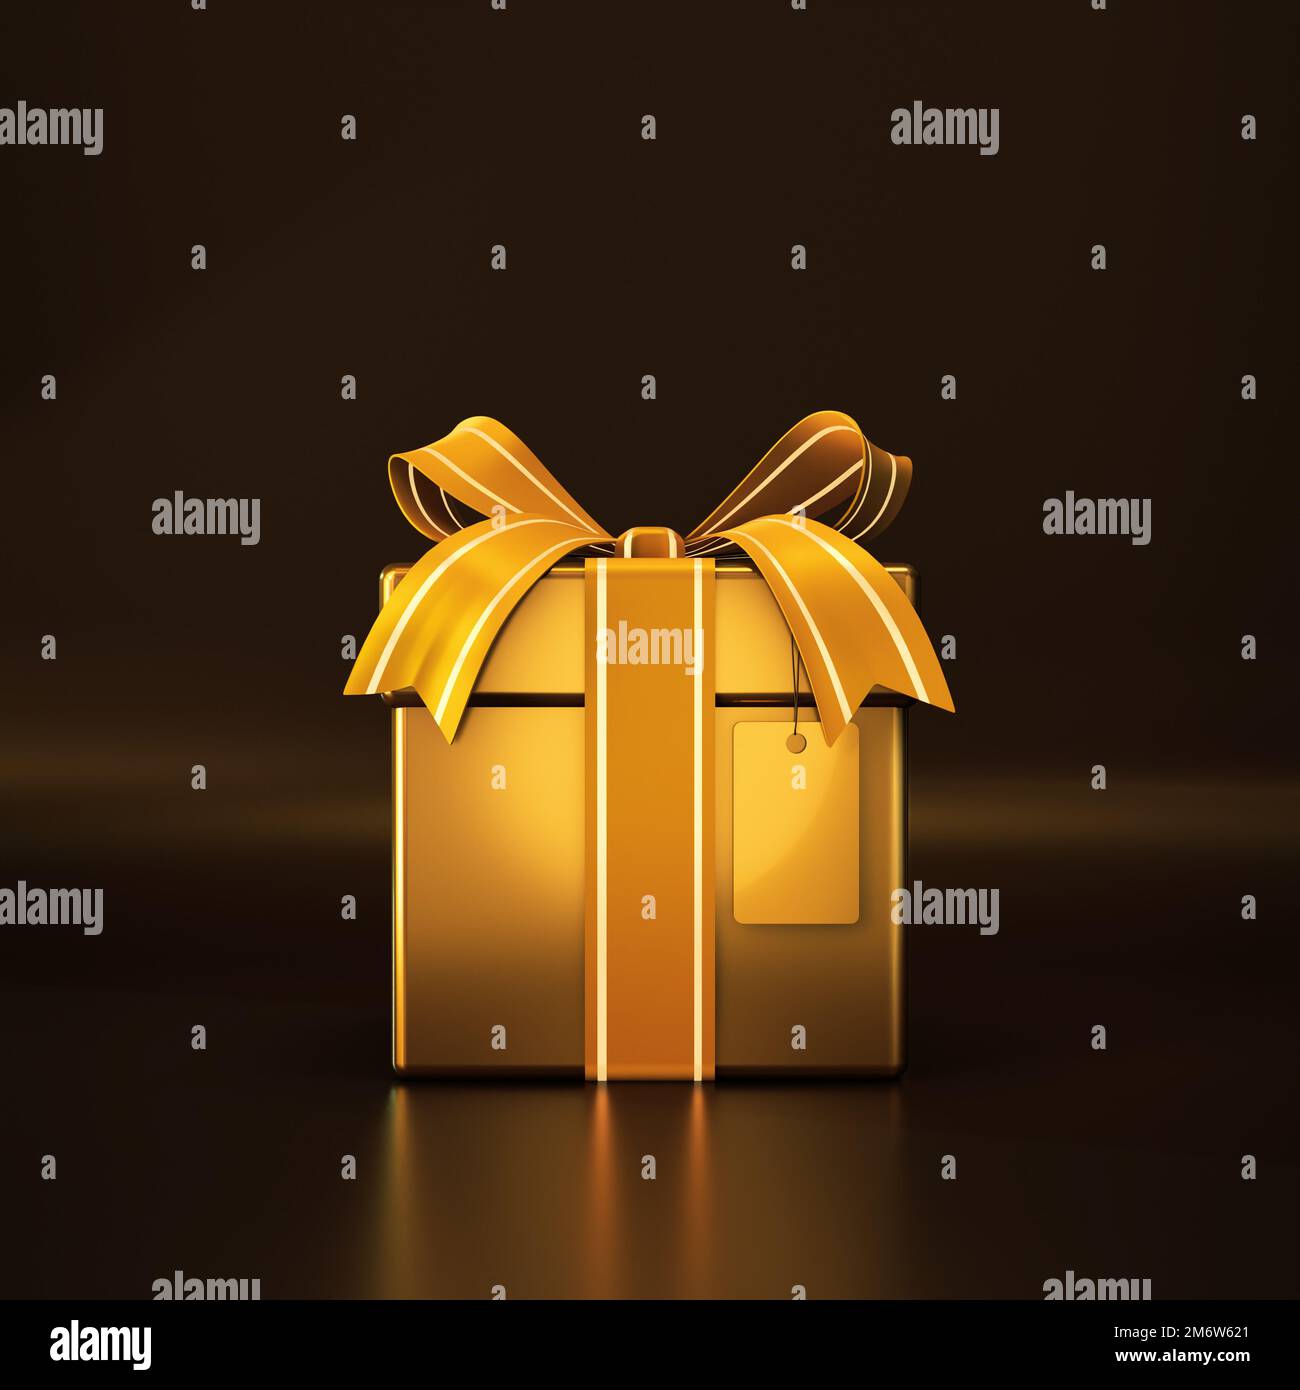 Golden gift box with price tag Stock Photo